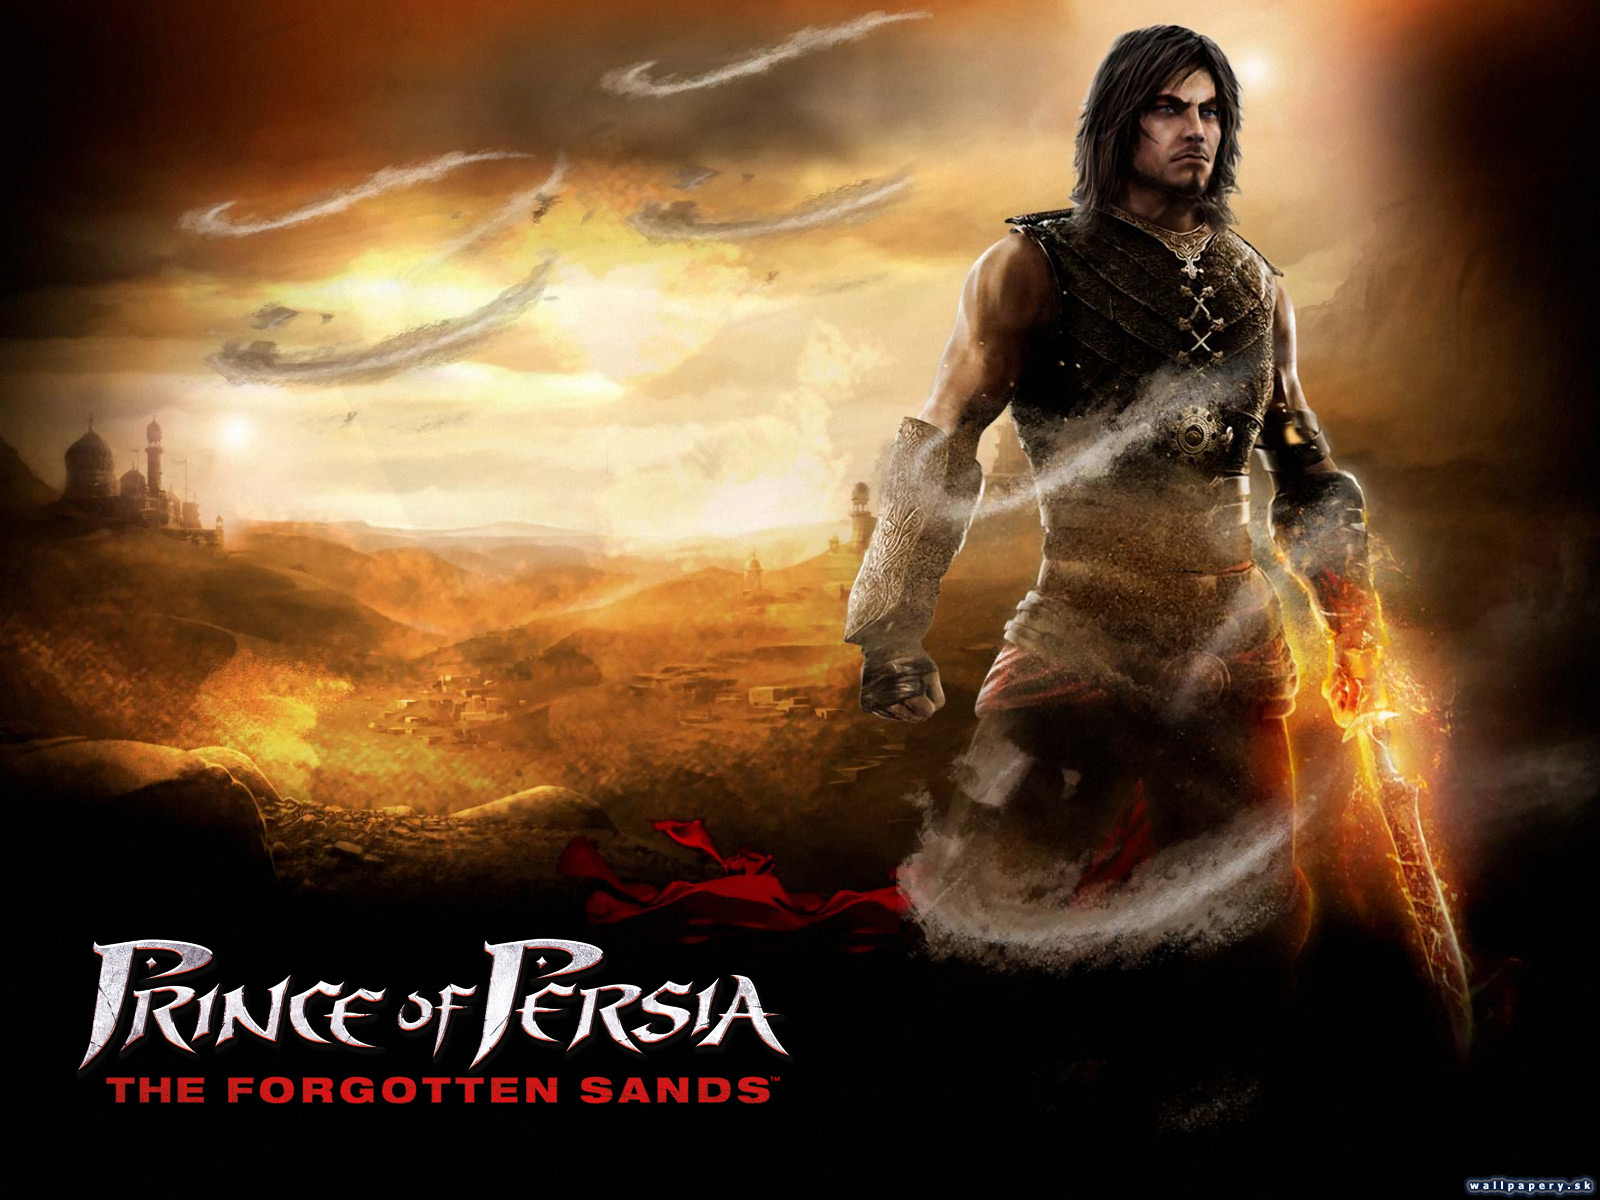 Prince of Persia: The Forgotten Sands - wallpaper 5